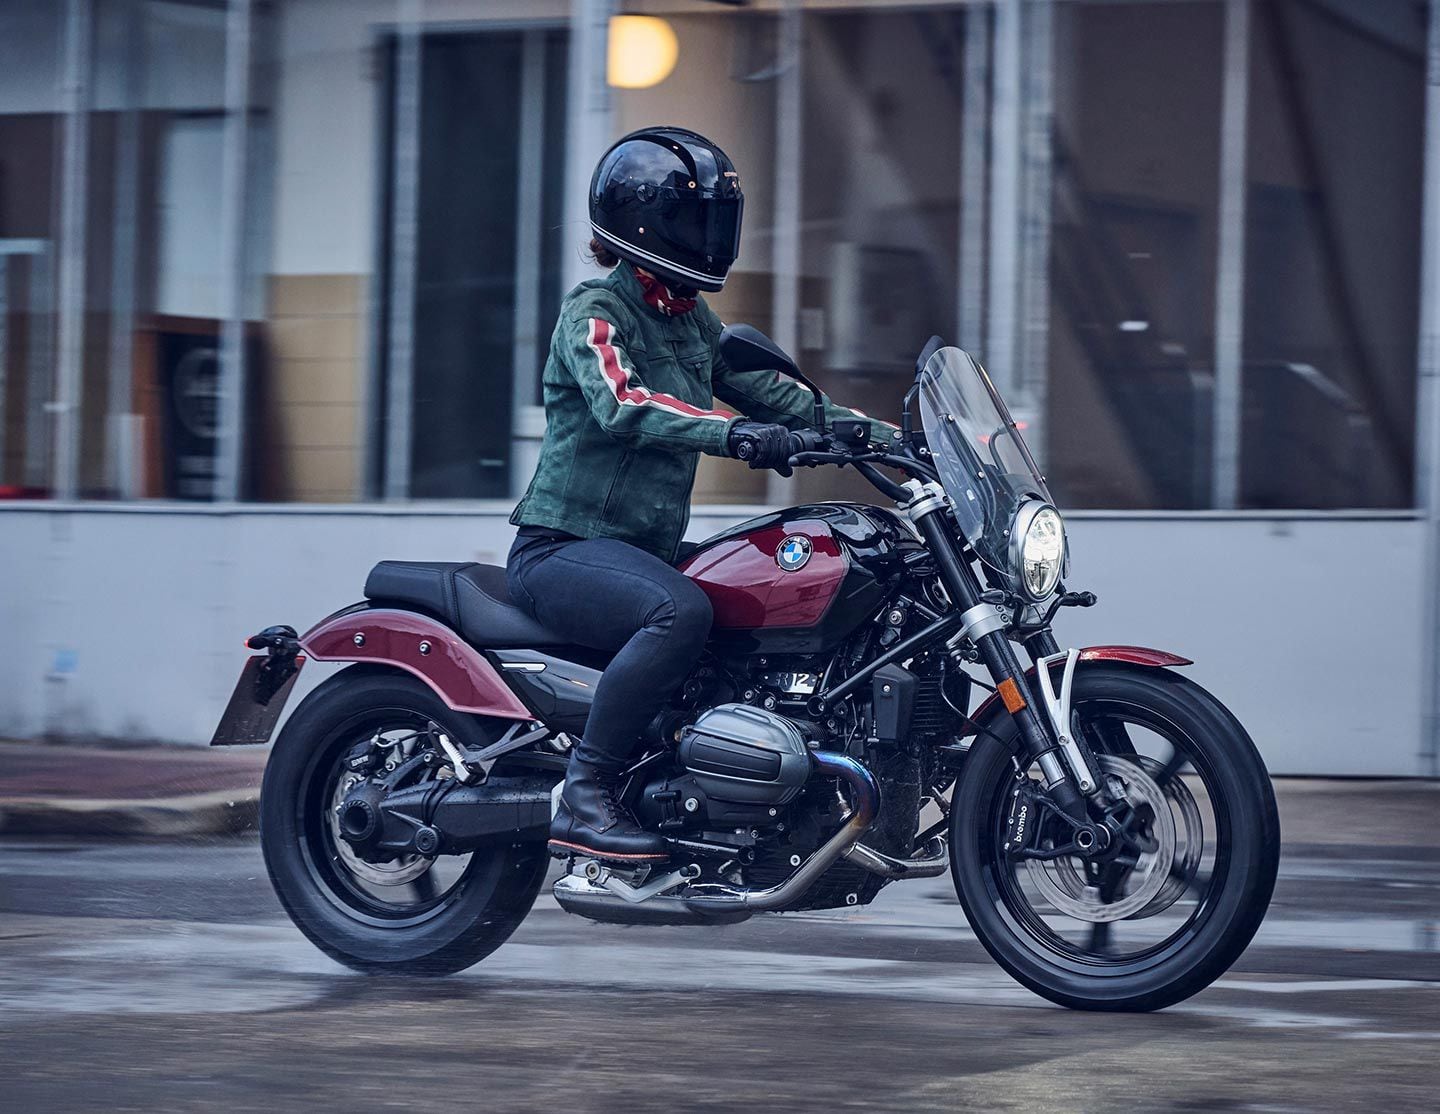 The new 2024 R 12 cruiser packs the R nineT’s boxer engine into a new frame, and adds a toaster-inspired steel tank, low seat, and wide bars.